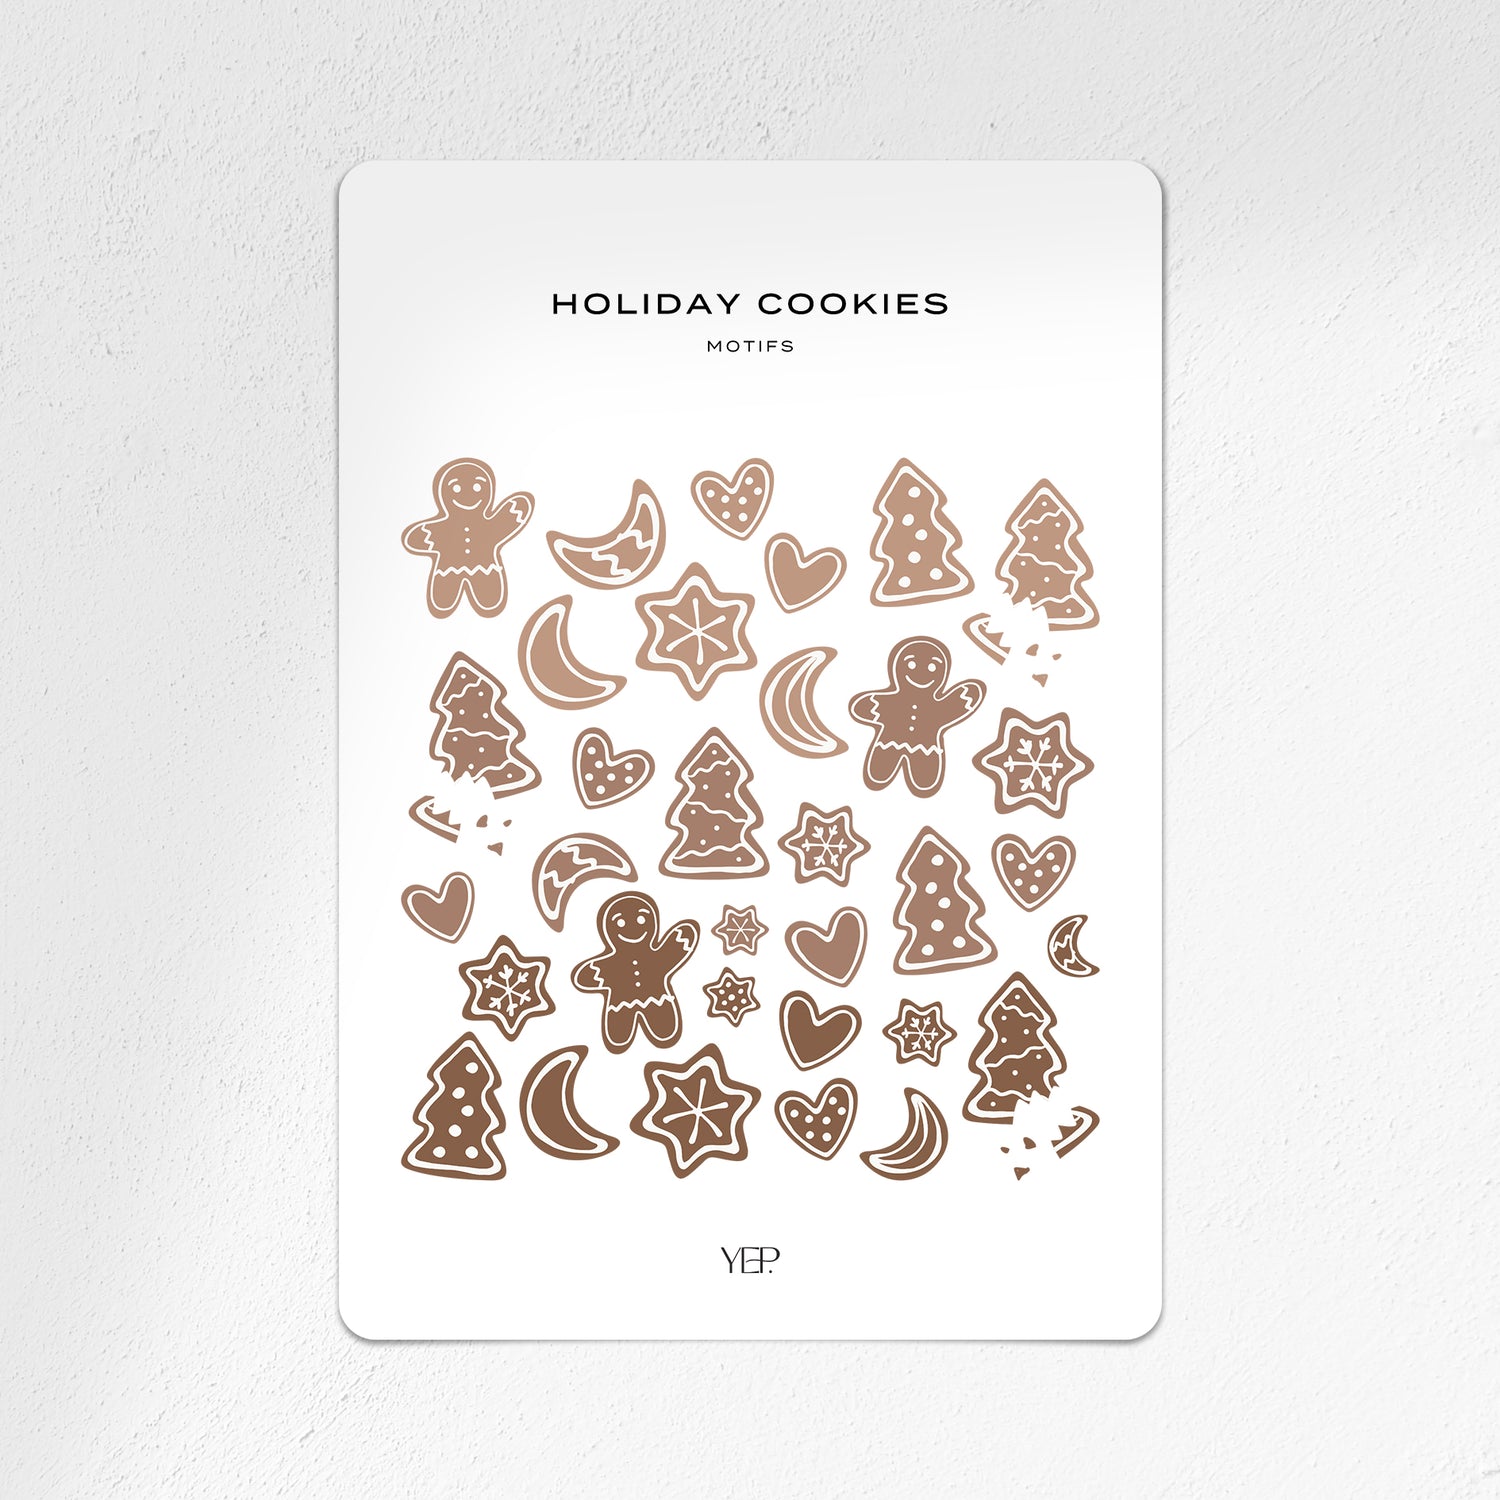 Holiday Cookies Motifs